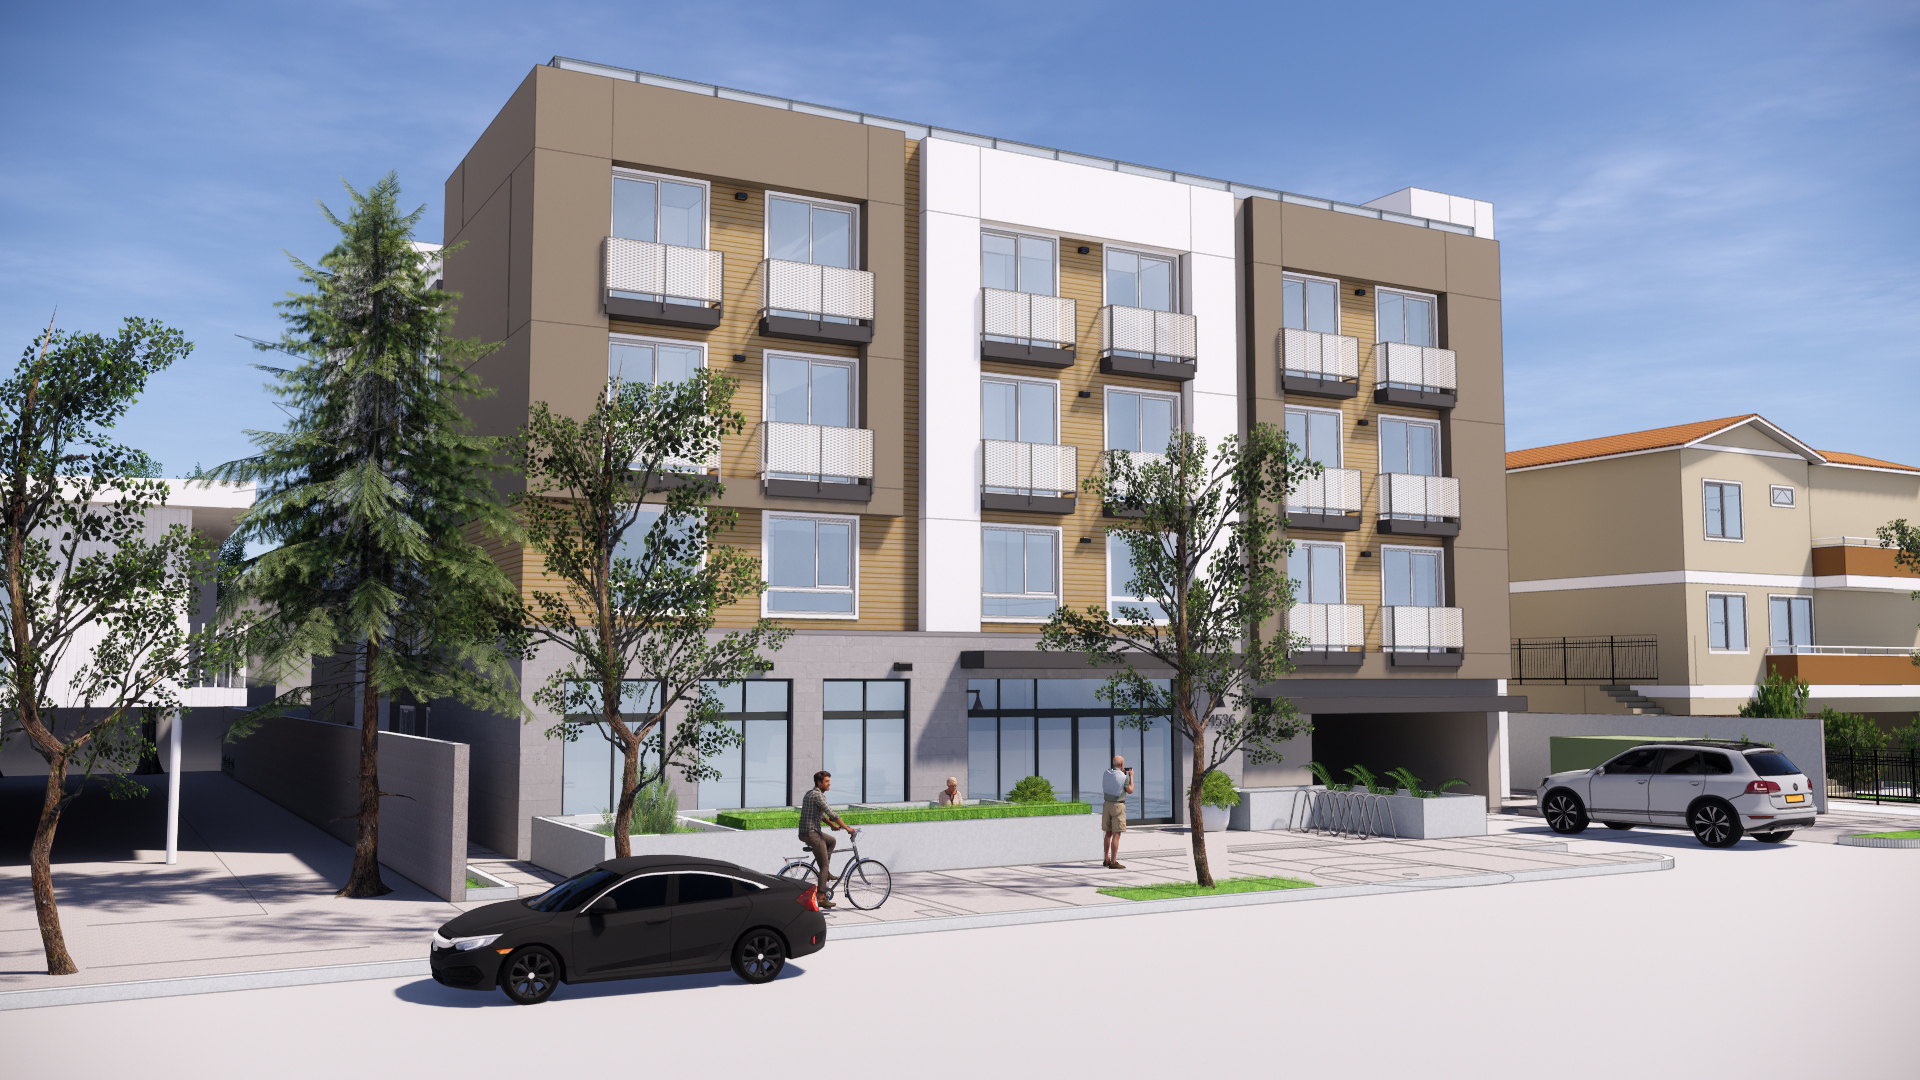 Rendering of three story building with covered parking